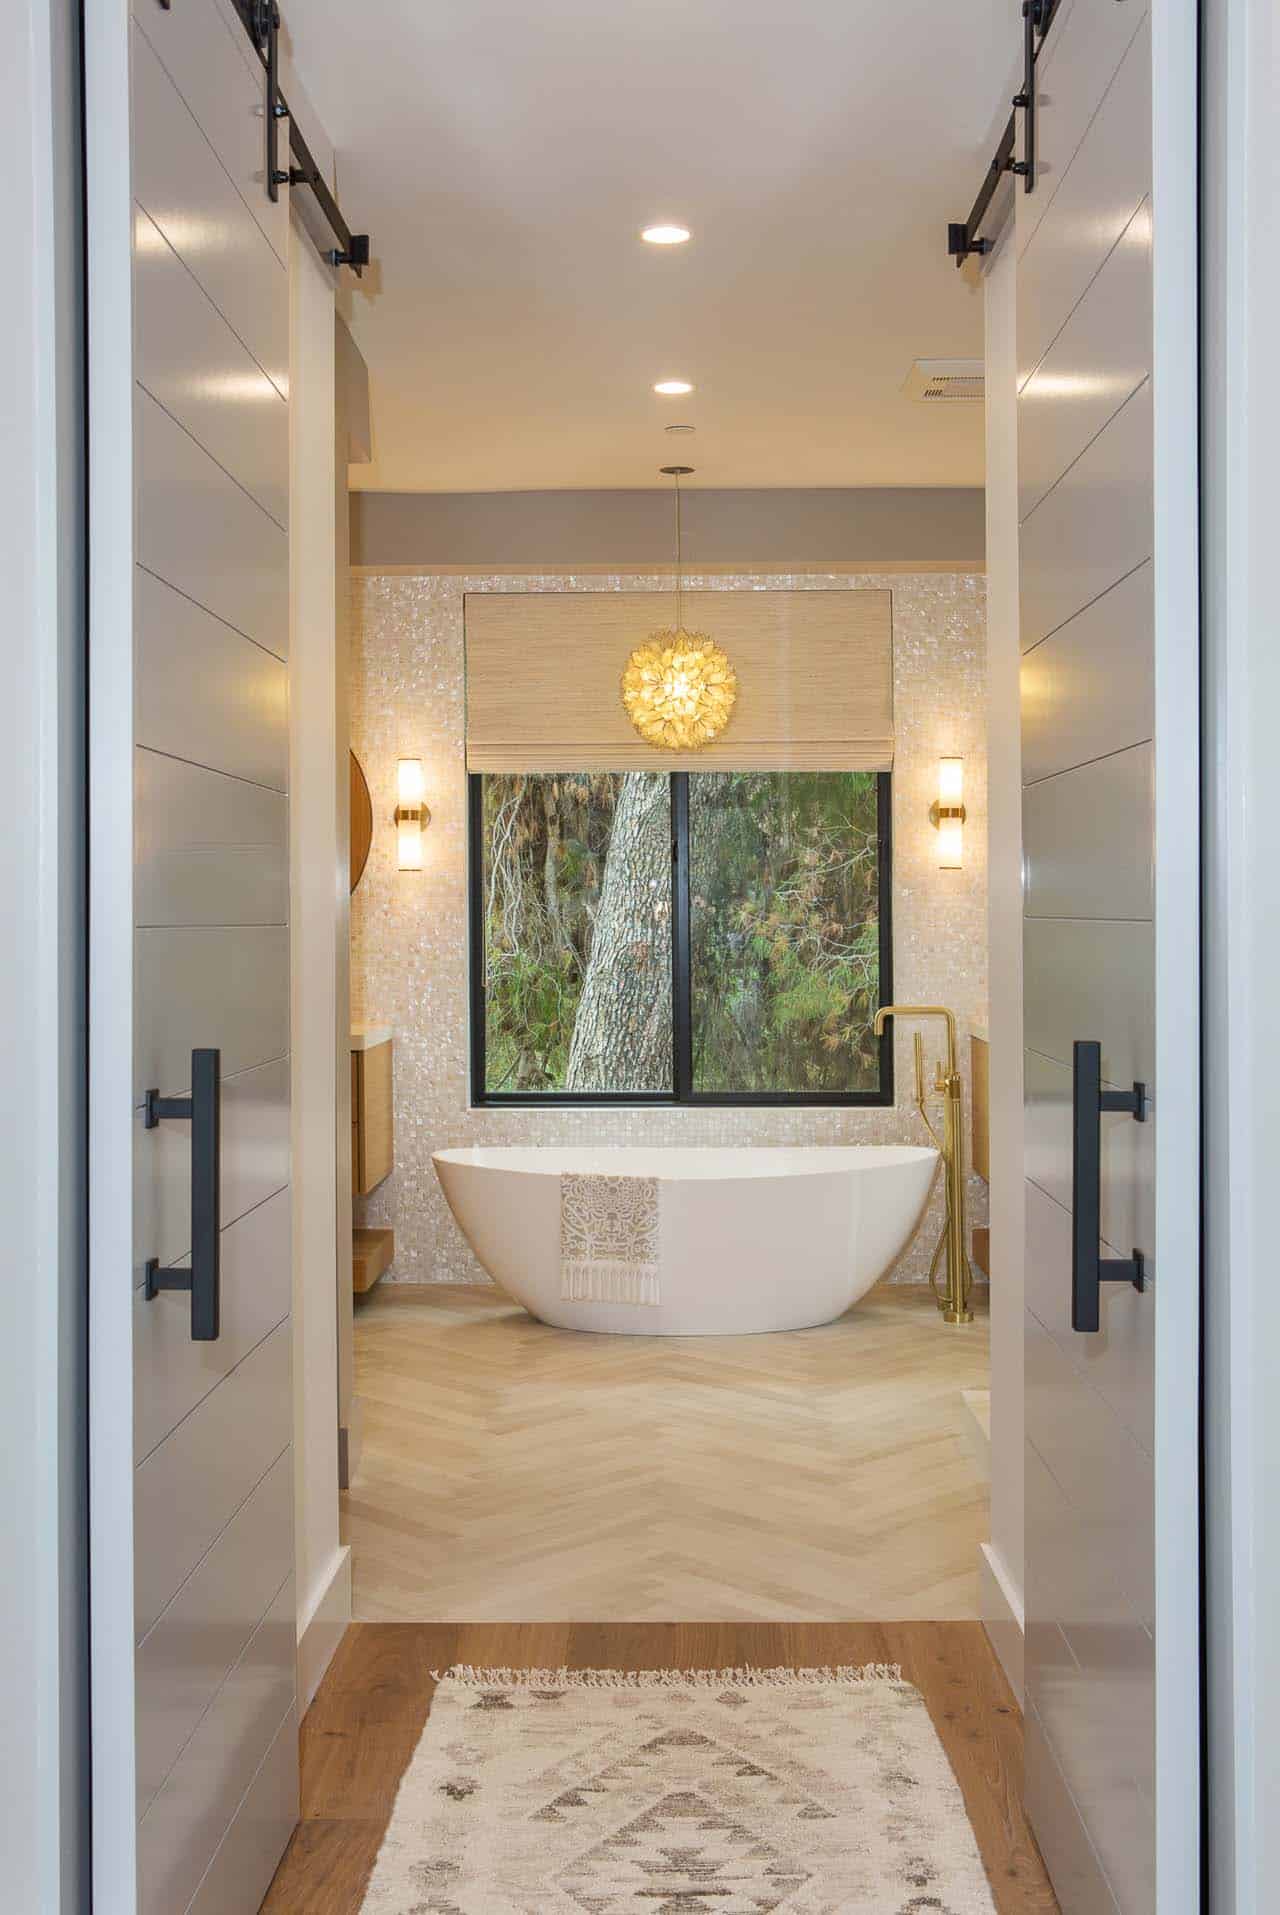 view into the bath to see the freestanding tub from the bedroom